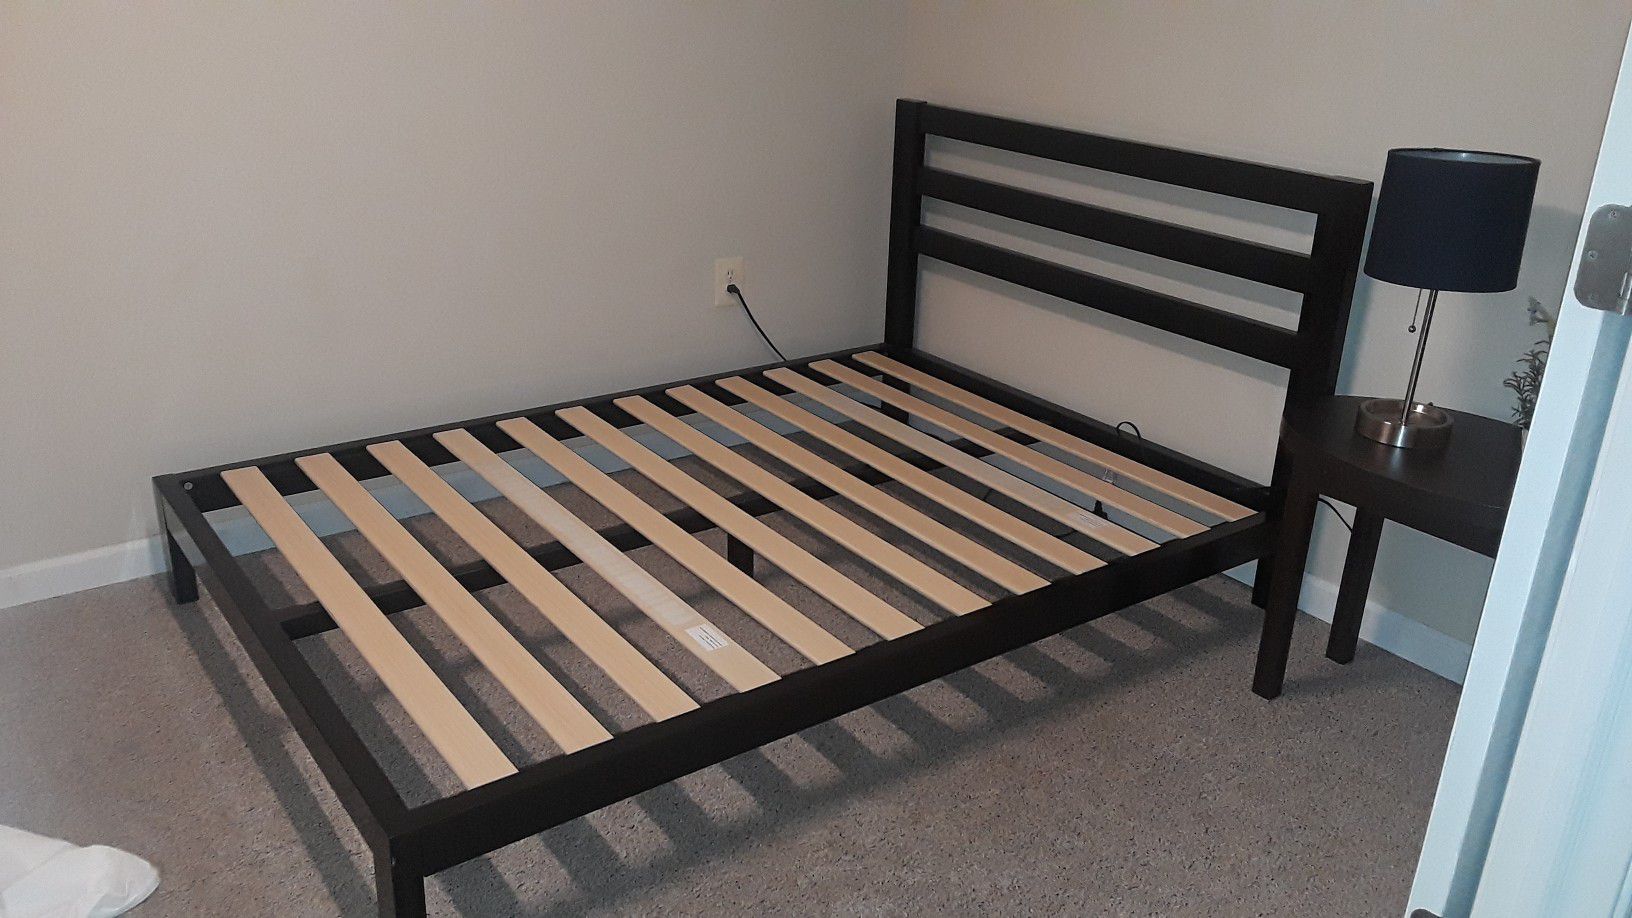 Double/Full bed frame, slates and free mattress